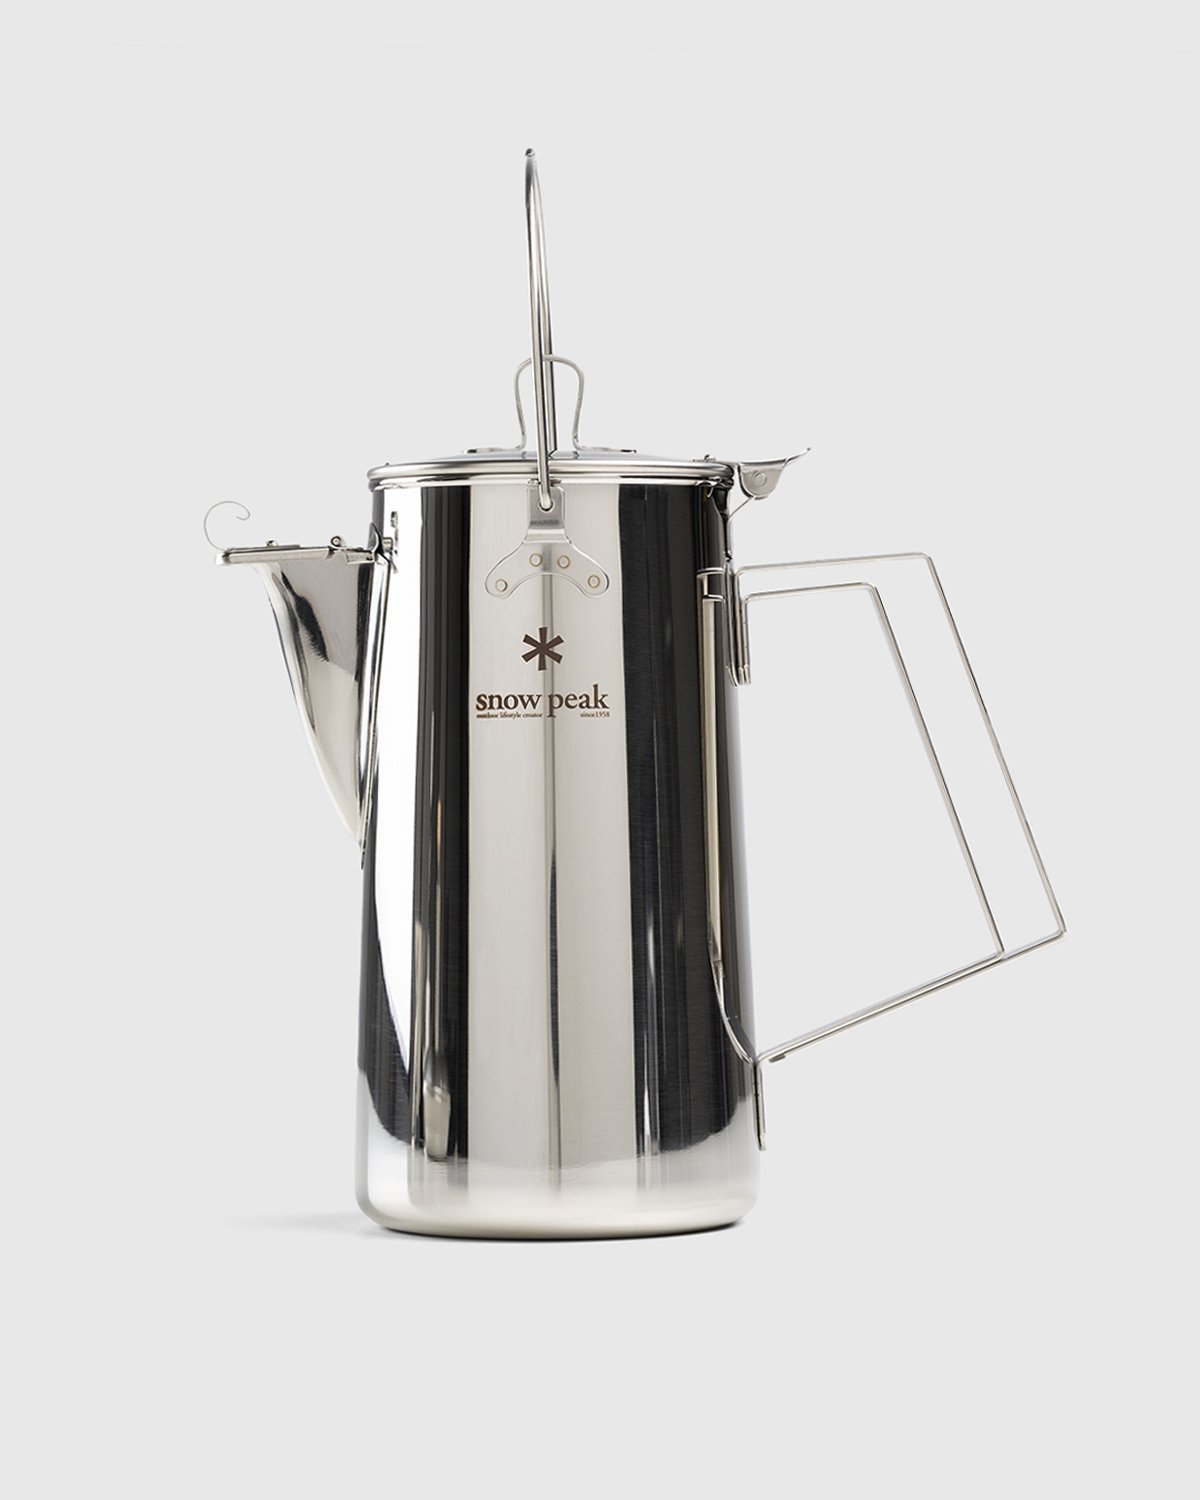 Snow Peak - Classic Kettle 1.8 Silver - Lifestyle - Green - Image 1